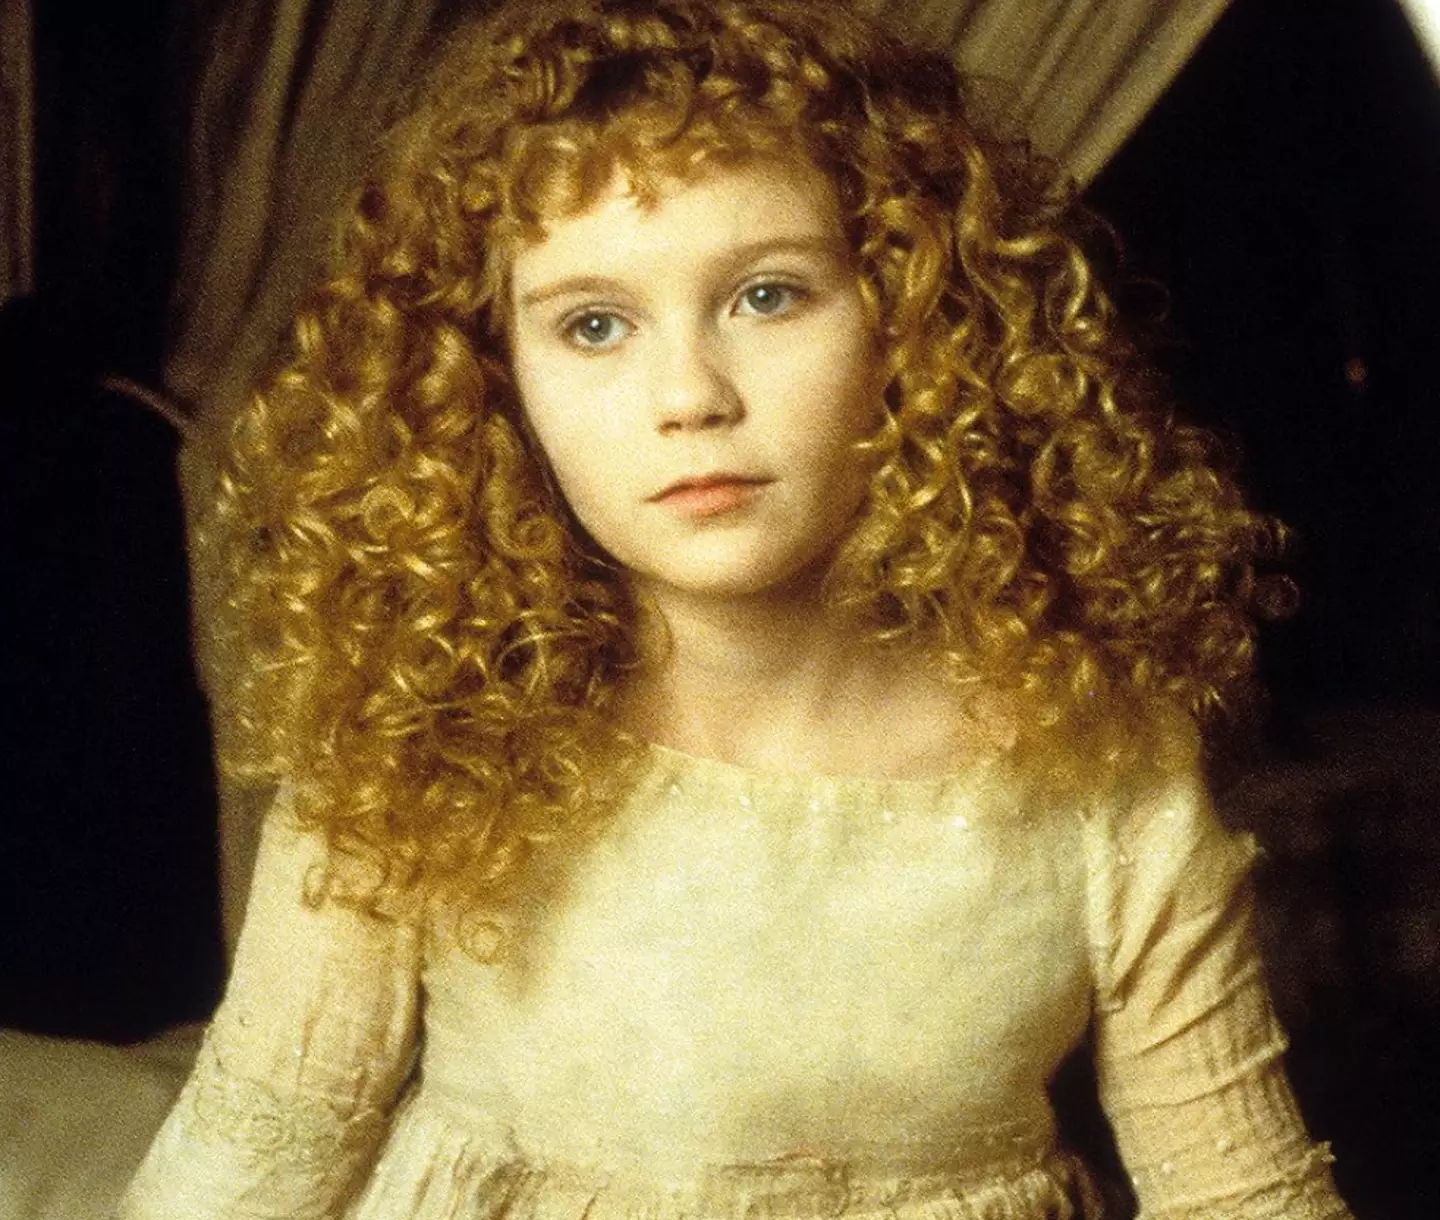 Kirsten Dunst played the young vampire Claudia in the film.